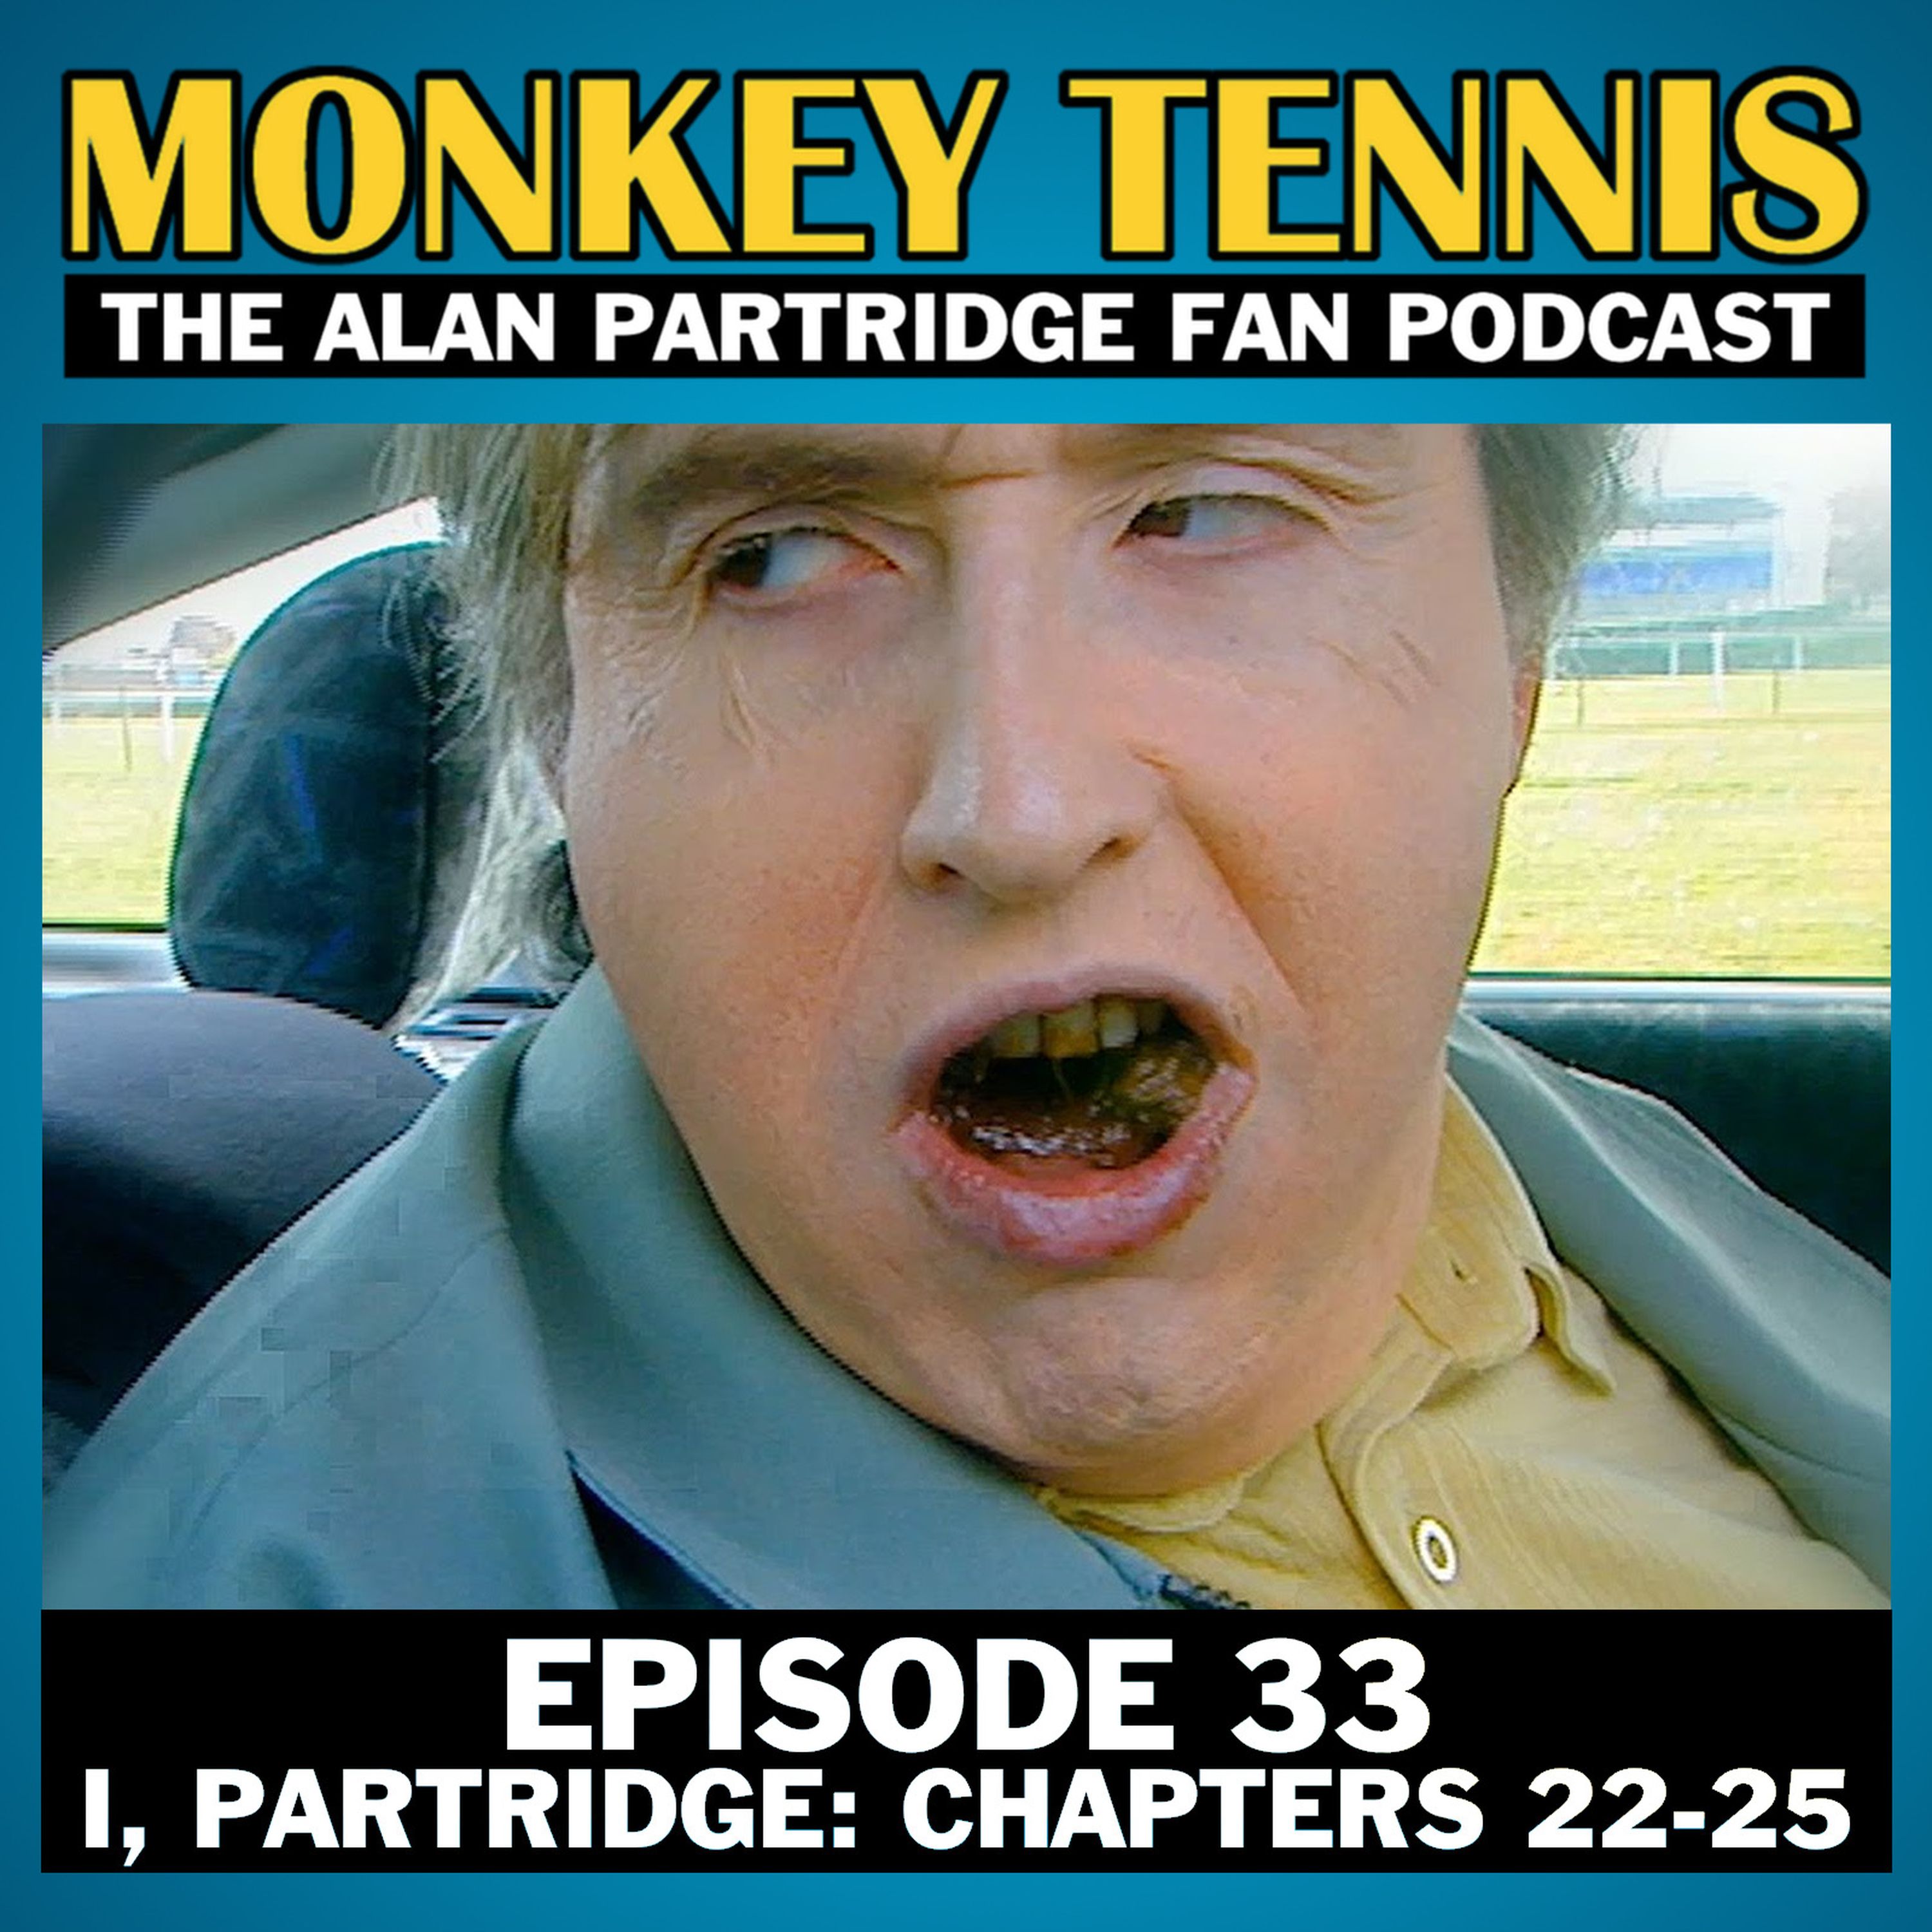 33 • I, Partridge: Chapters 22-25